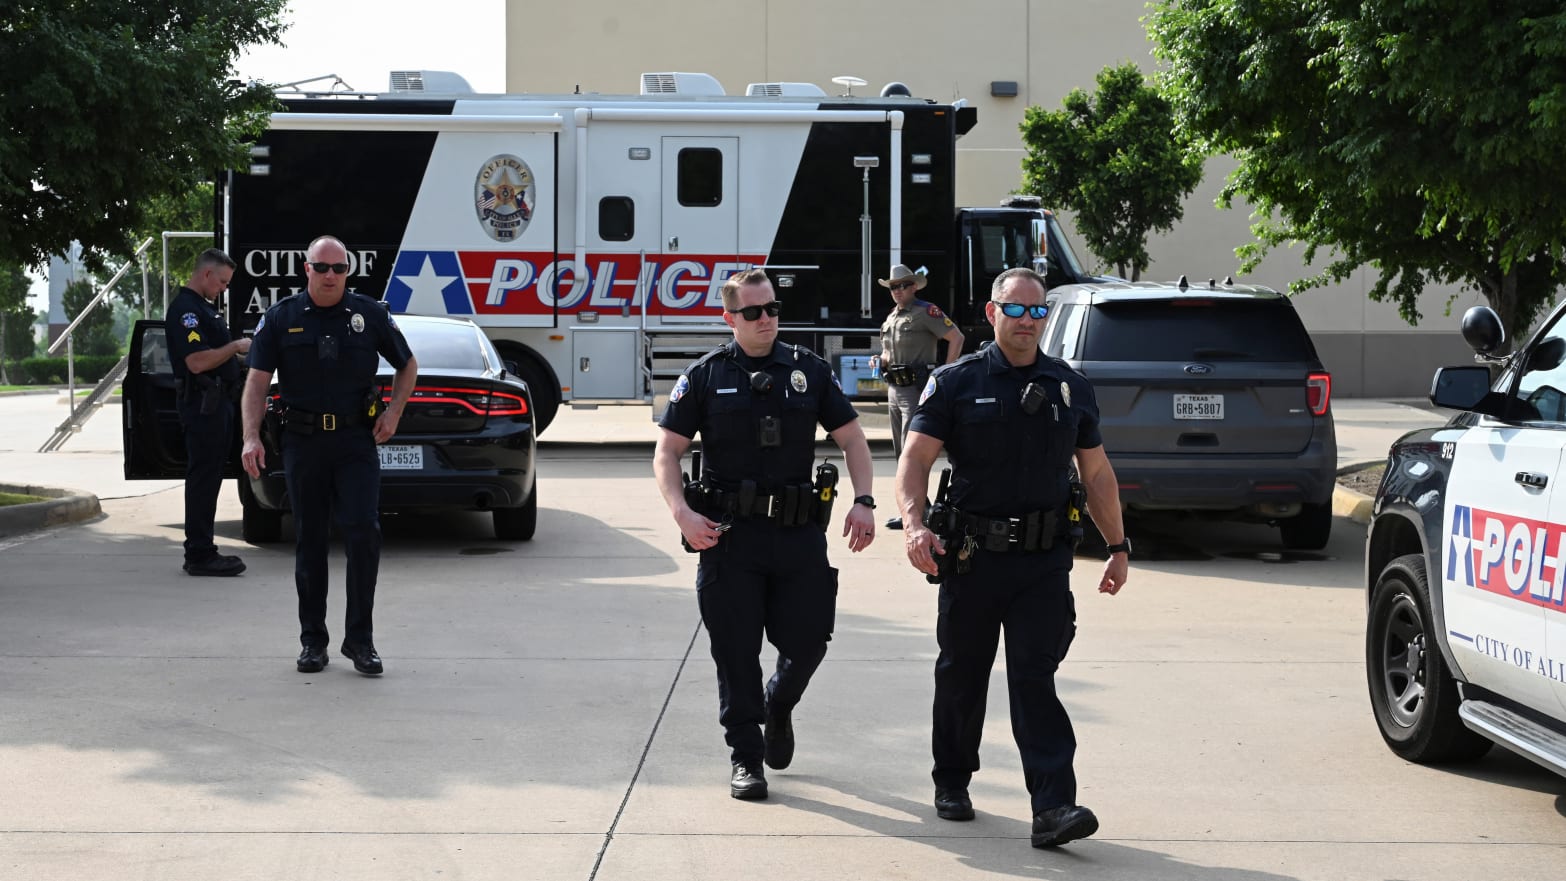 Officers with the Allen Police Department man the mobile command post the day after a gunman shot multiple people at the Dallas-area Allen Premium Outlets mall in Allen, Texas, May 7, 2023.